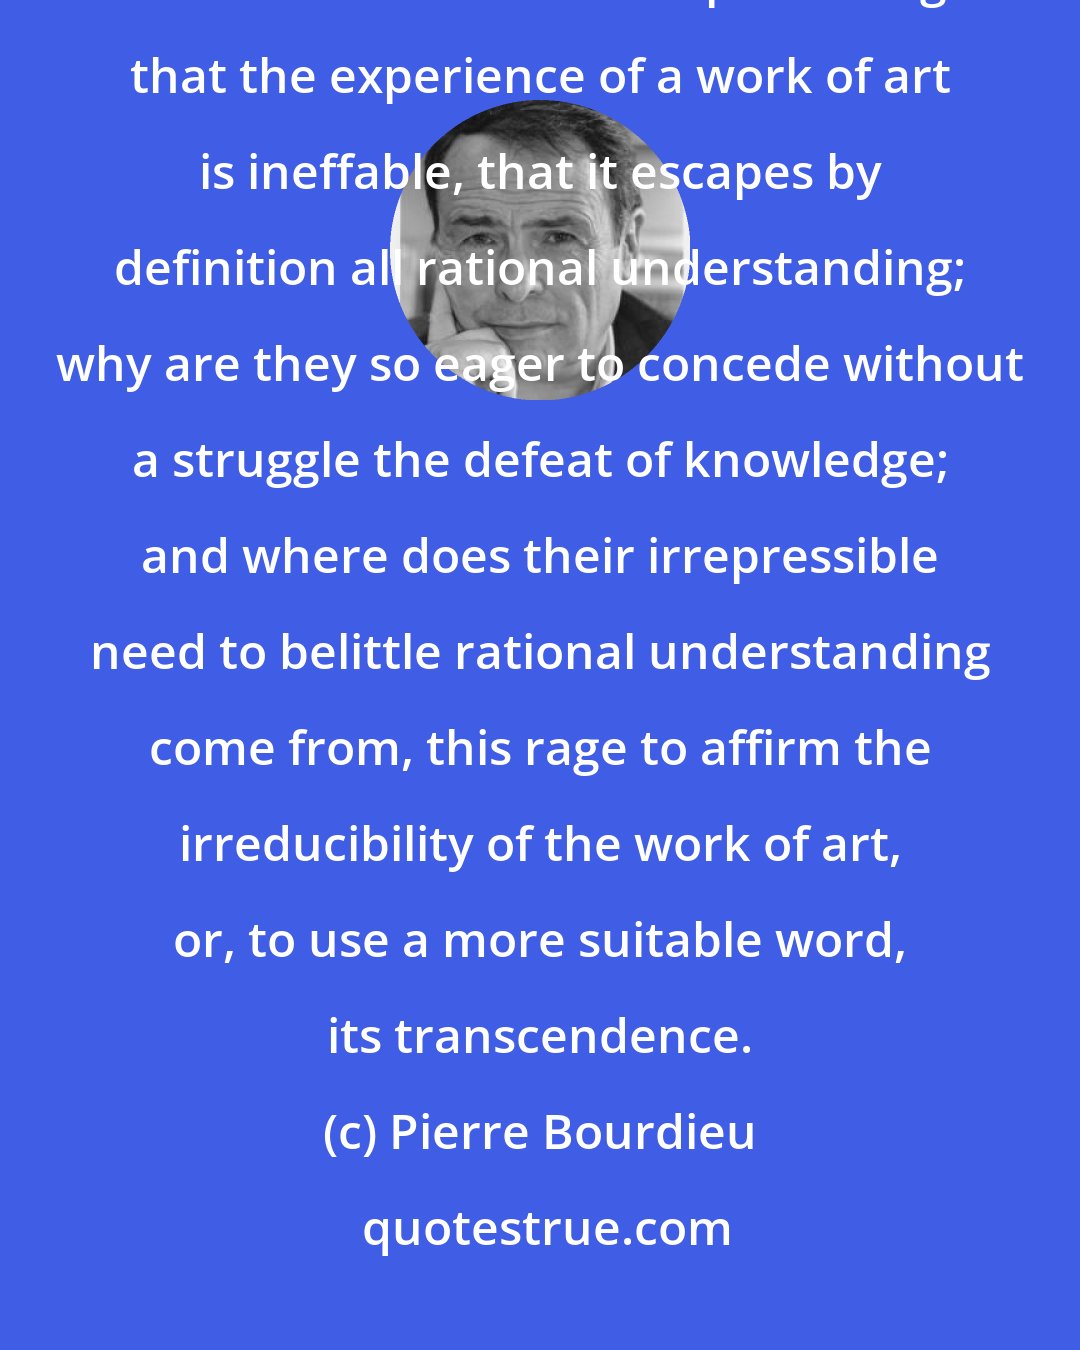 Pierre Bourdieu: I would simply ask why so many critics, so many writers, so many philosophers take such satisfaction in professing that the experience of a work of art is ineffable, that it escapes by definition all rational understanding; why are they so eager to concede without a struggle the defeat of knowledge; and where does their irrepressible need to belittle rational understanding come from, this rage to affirm the irreducibility of the work of art, or, to use a more suitable word, its transcendence.